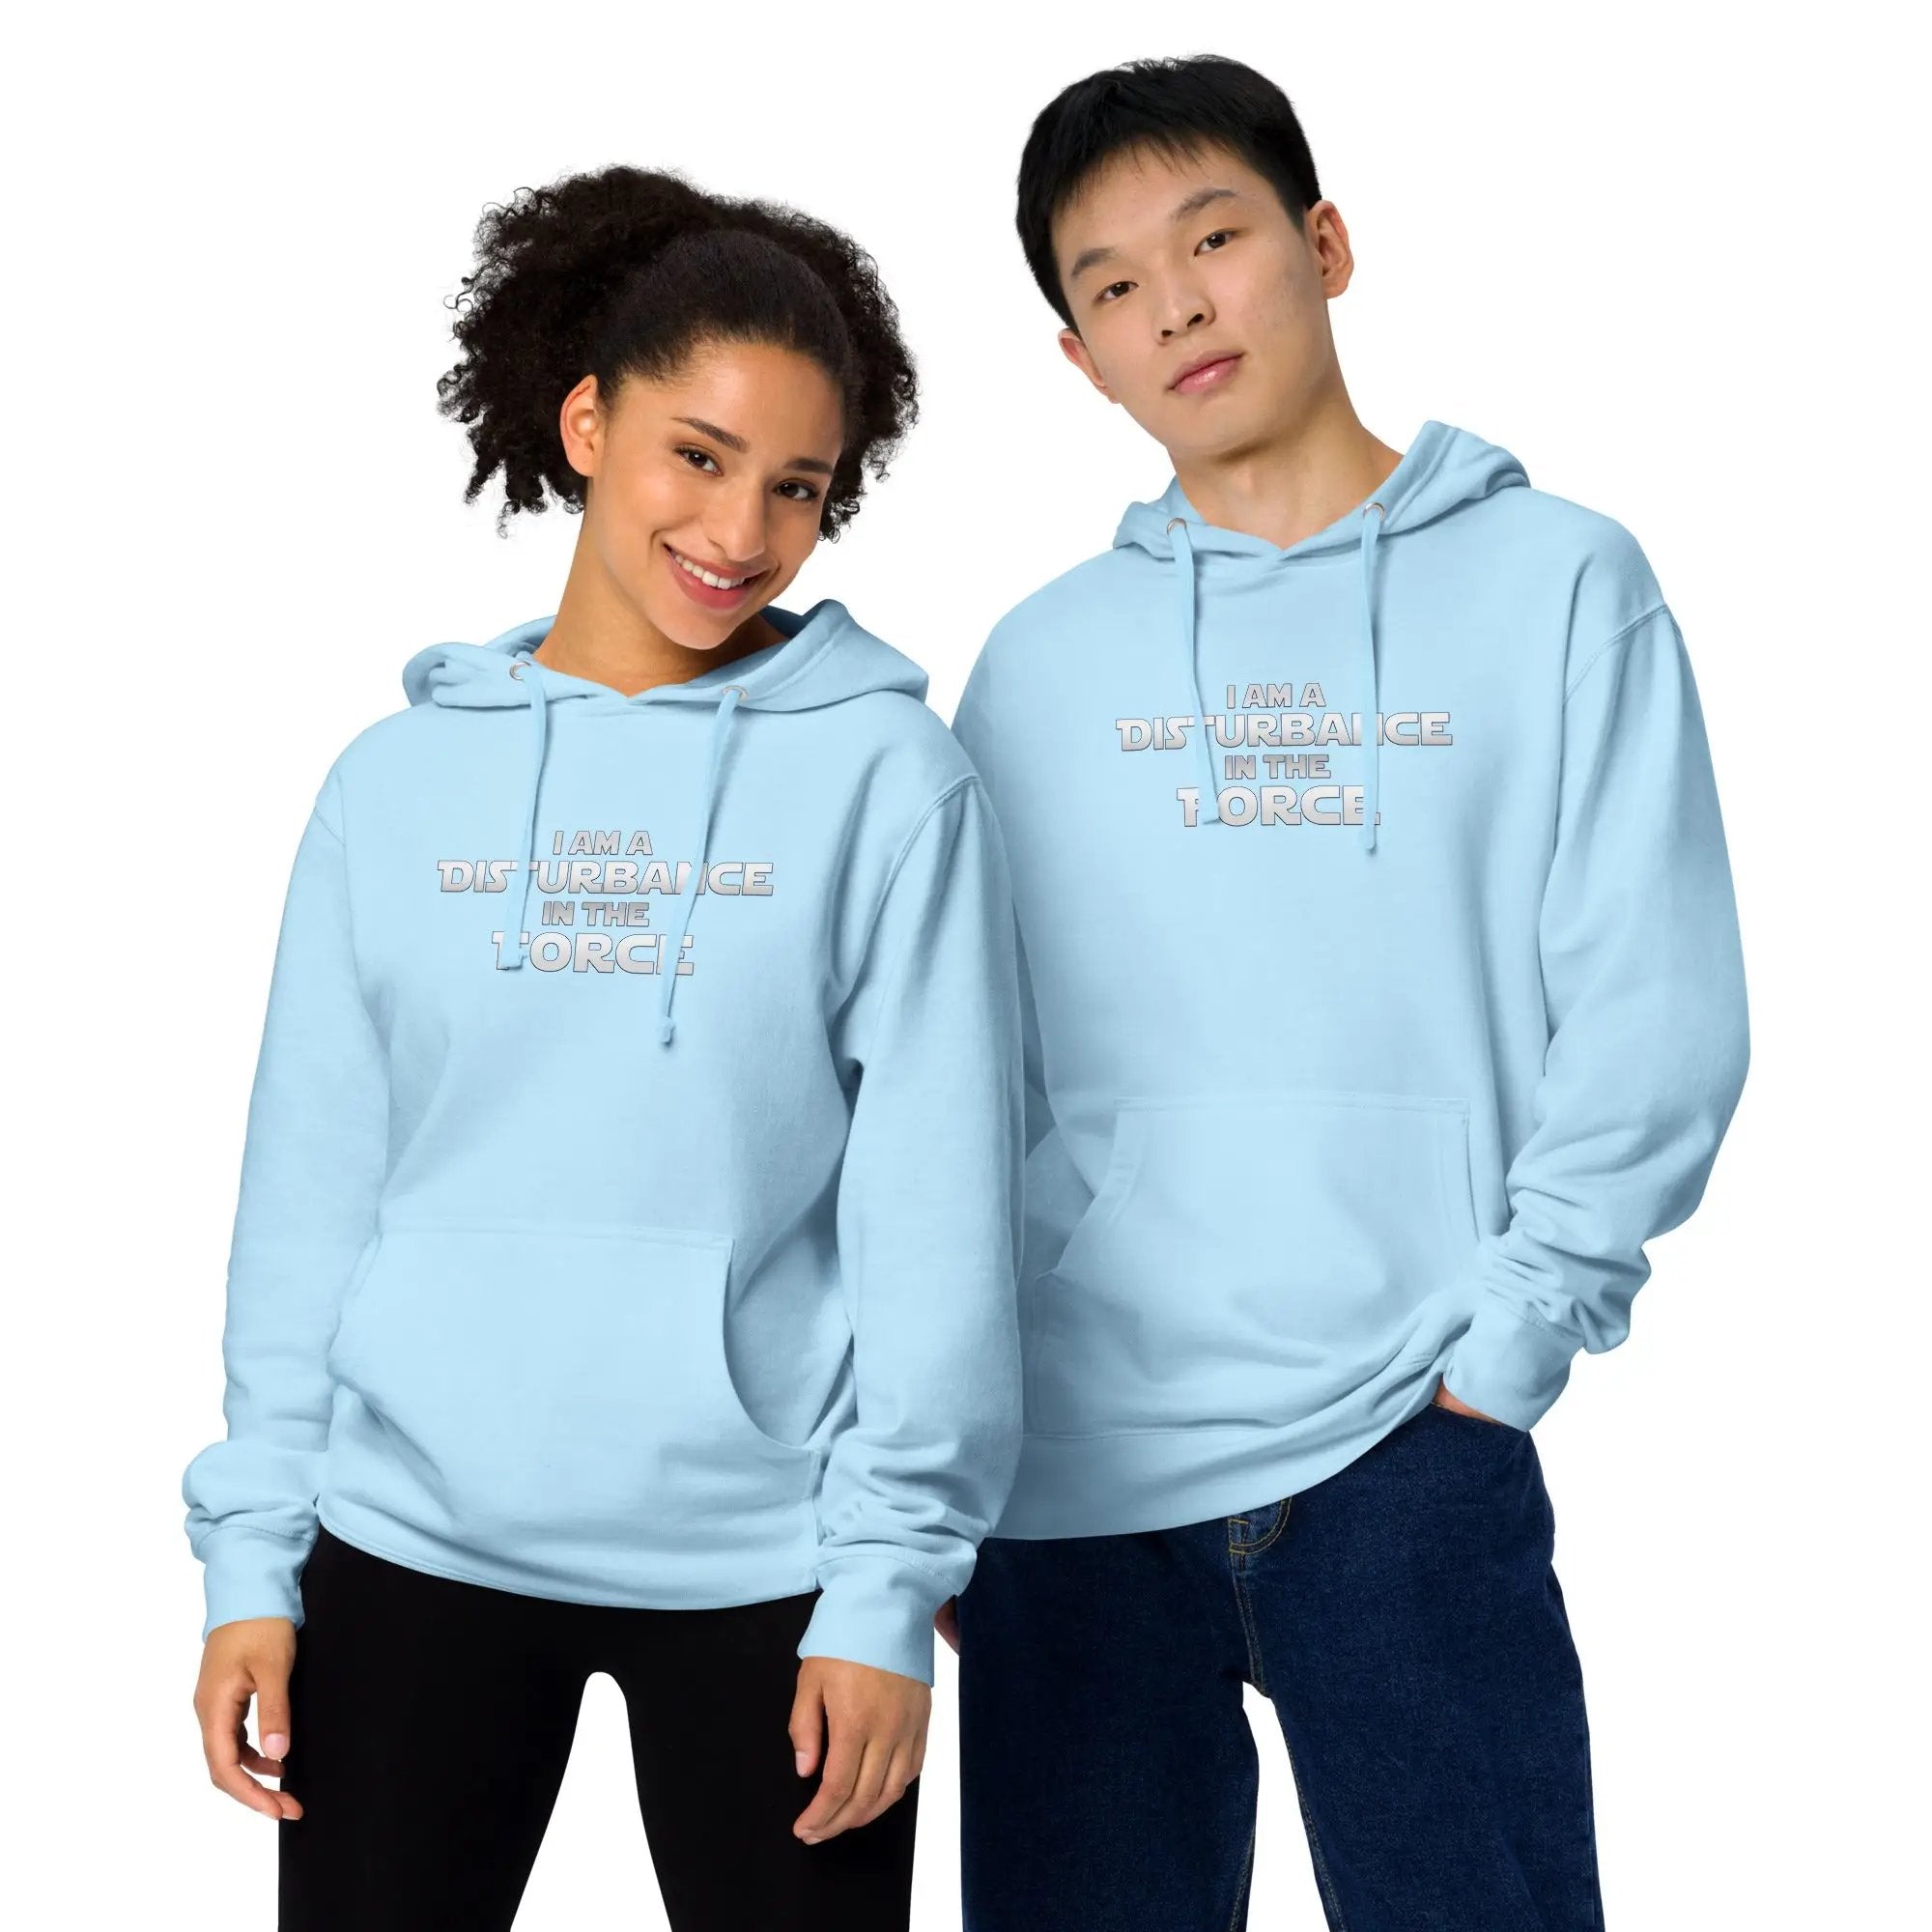 Disturbance In The Force Unisex midweight hoodie